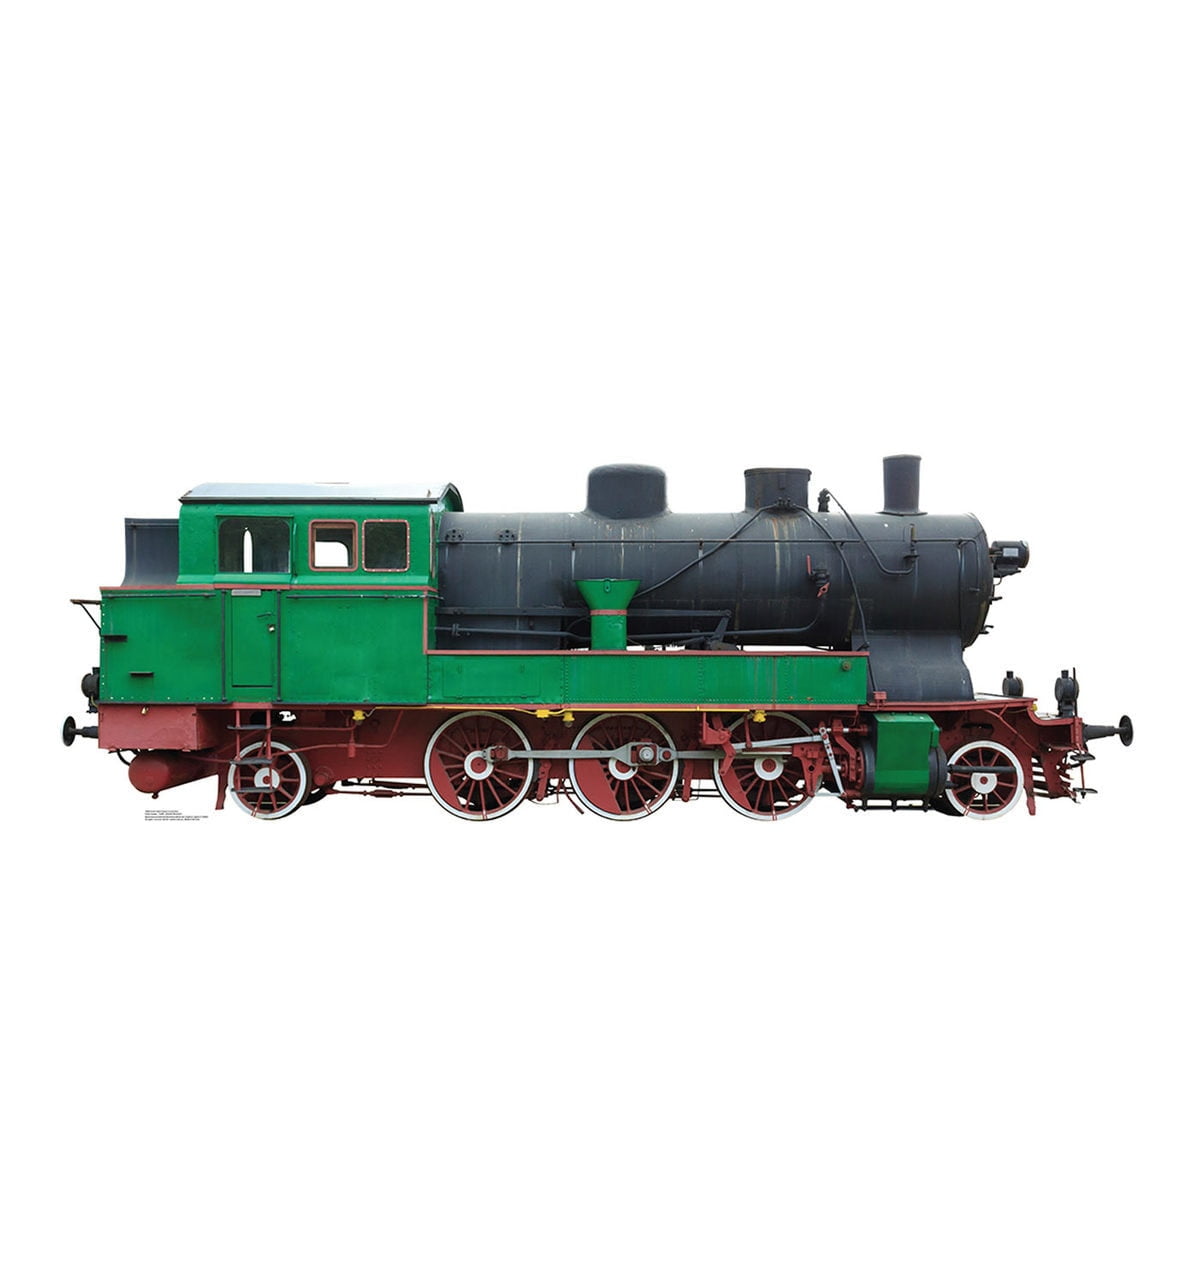 Picture of Advanced Graphics 1999 30 x 88 in. Green & Red Steam Locomotive Cardboard Standup